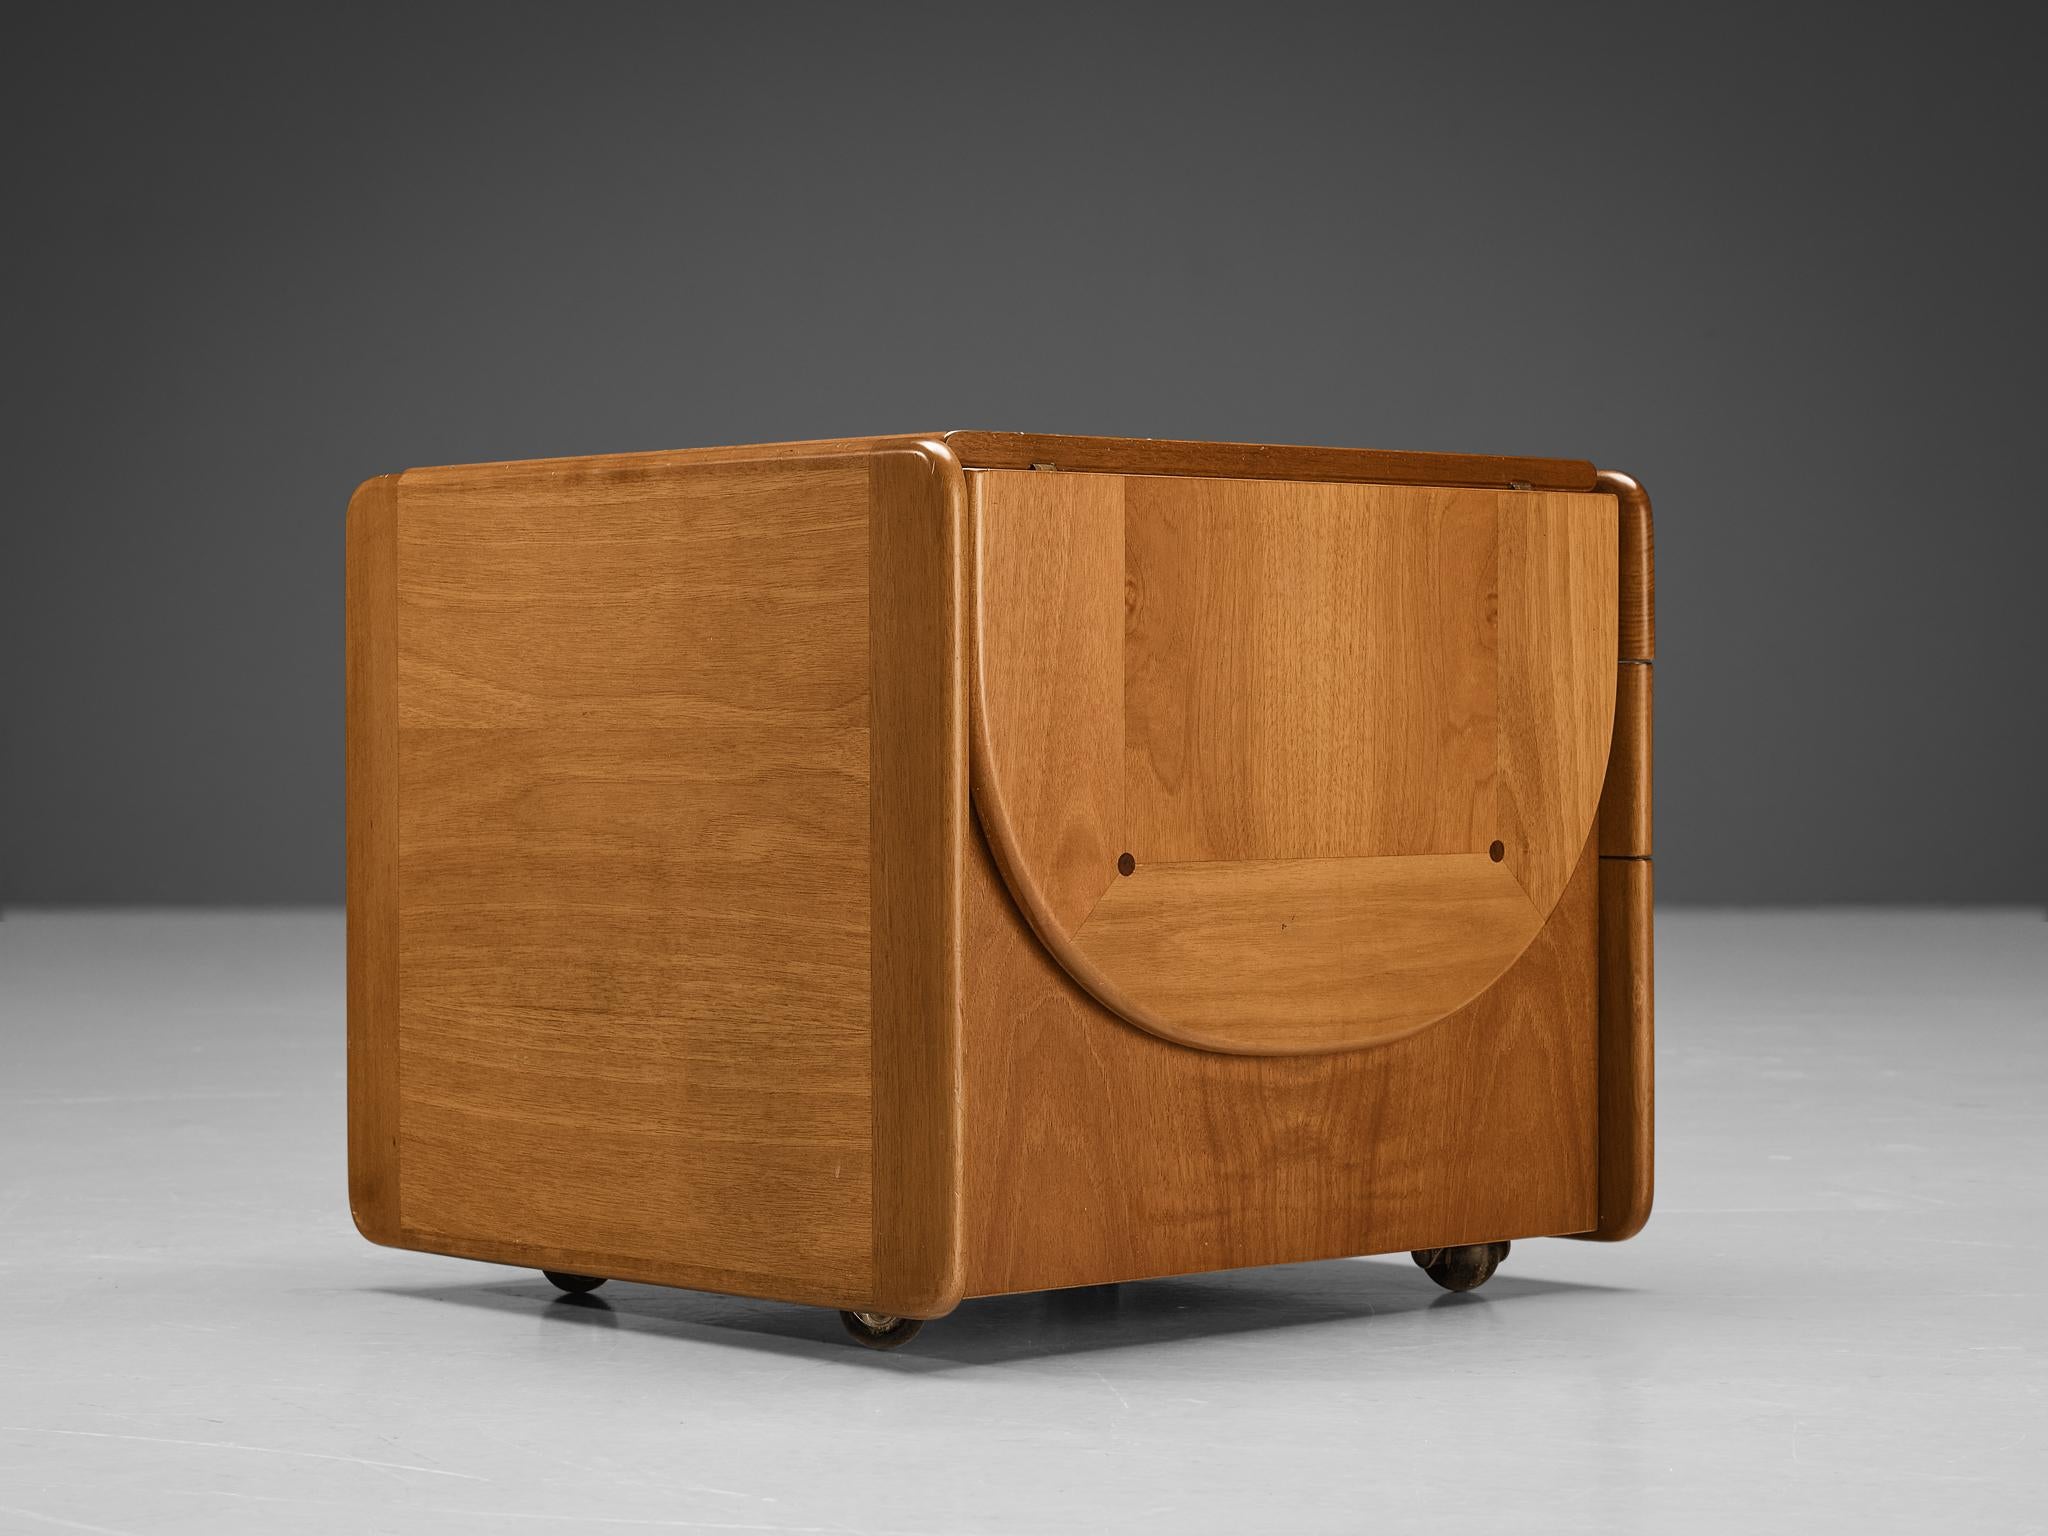 Italian Afra & Tobia Scarpa for Molteni Pair of Nightstands in Walnut